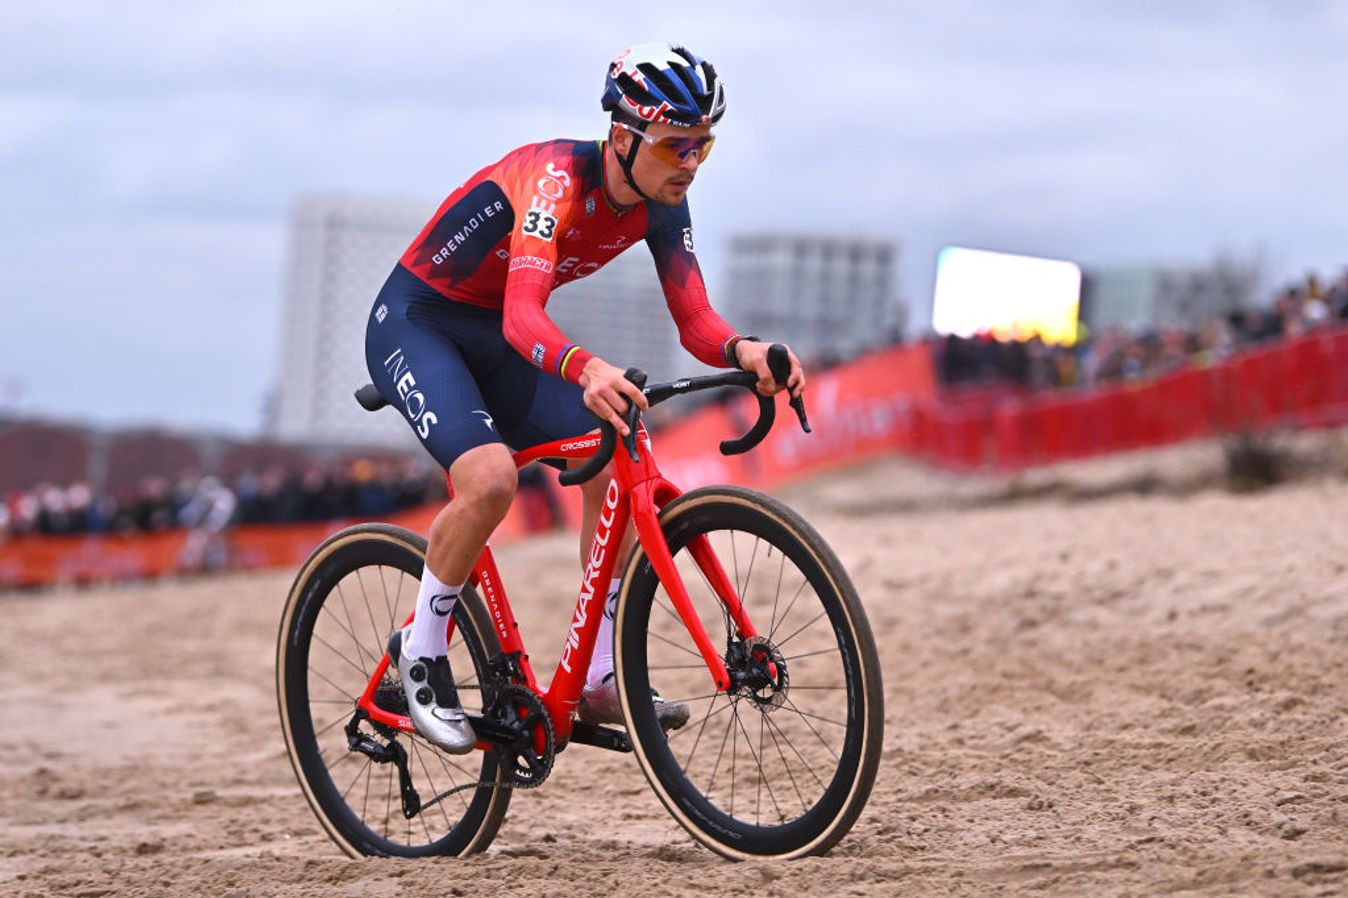 After a winter of cyclo-cross racing, Tom Pidcock has transitioned back onto the road